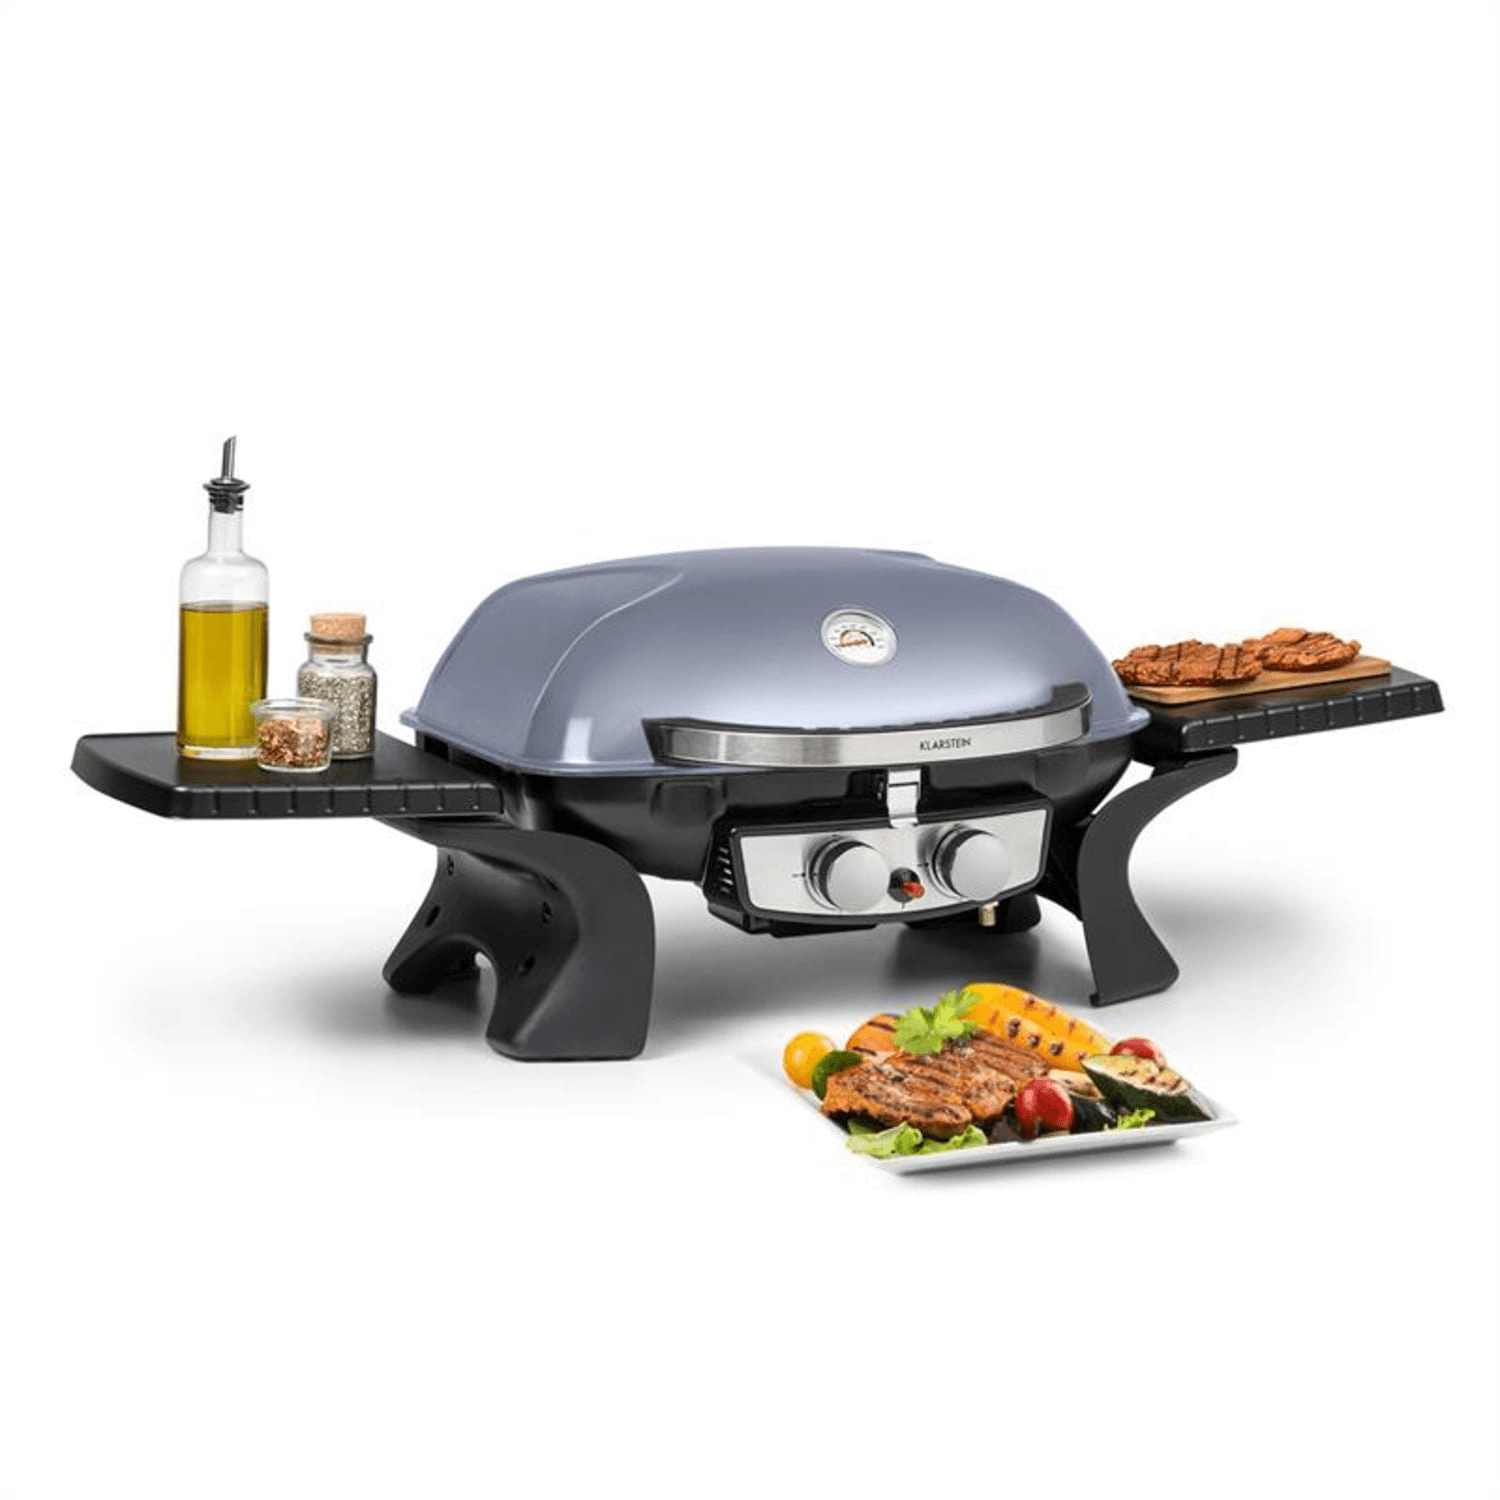 Parforce Duo grill